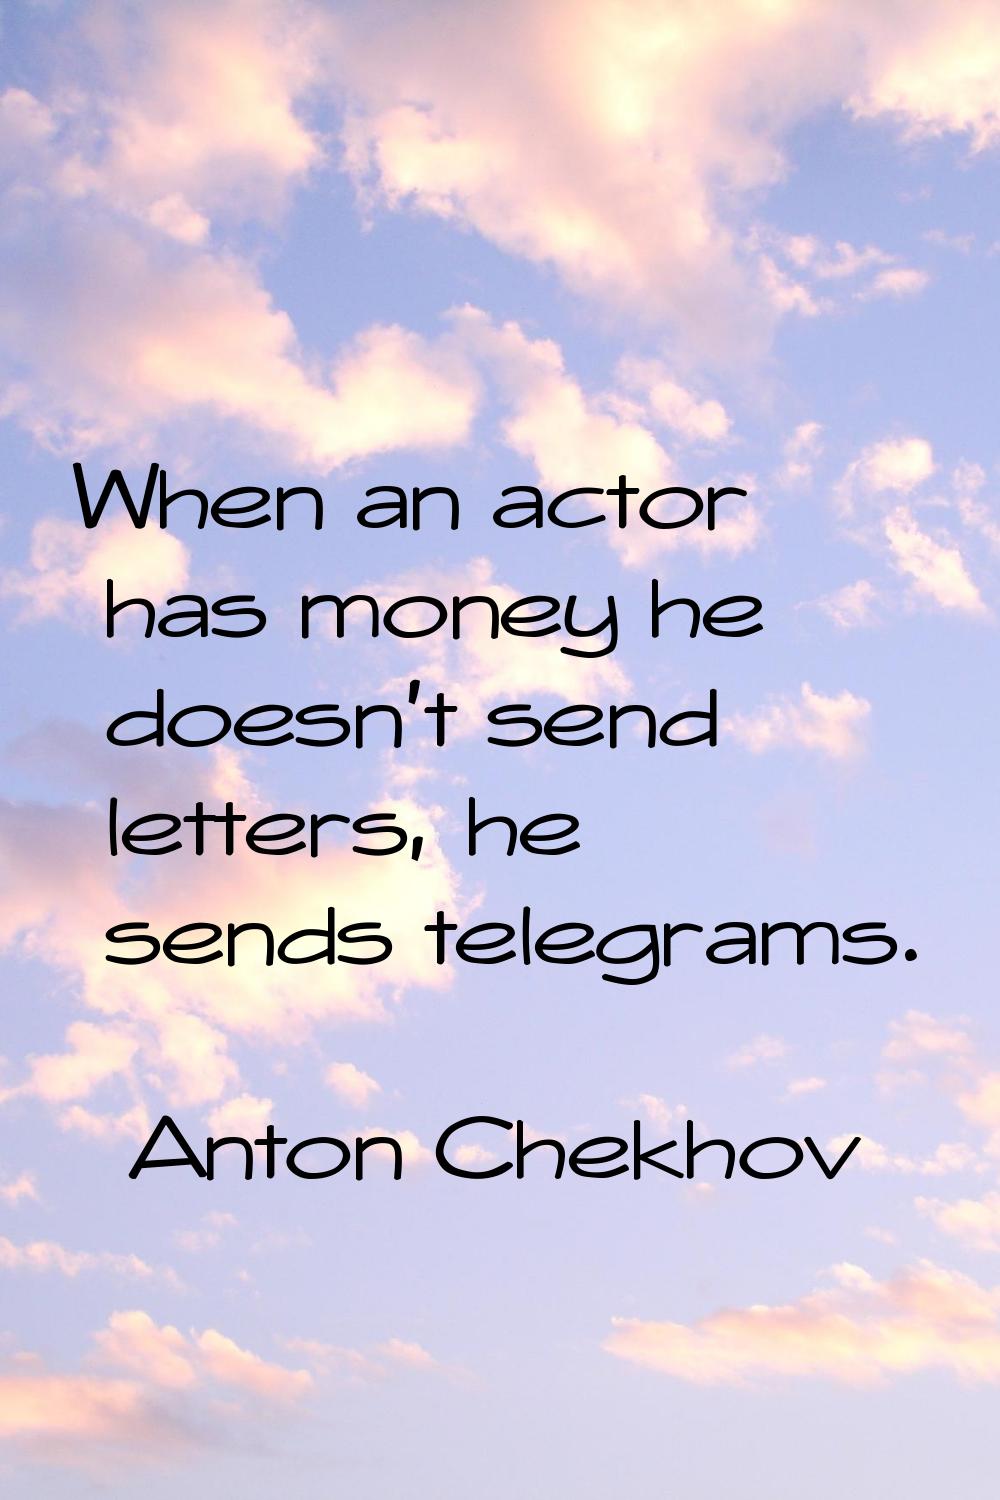 When an actor has money he doesn't send letters, he sends telegrams.